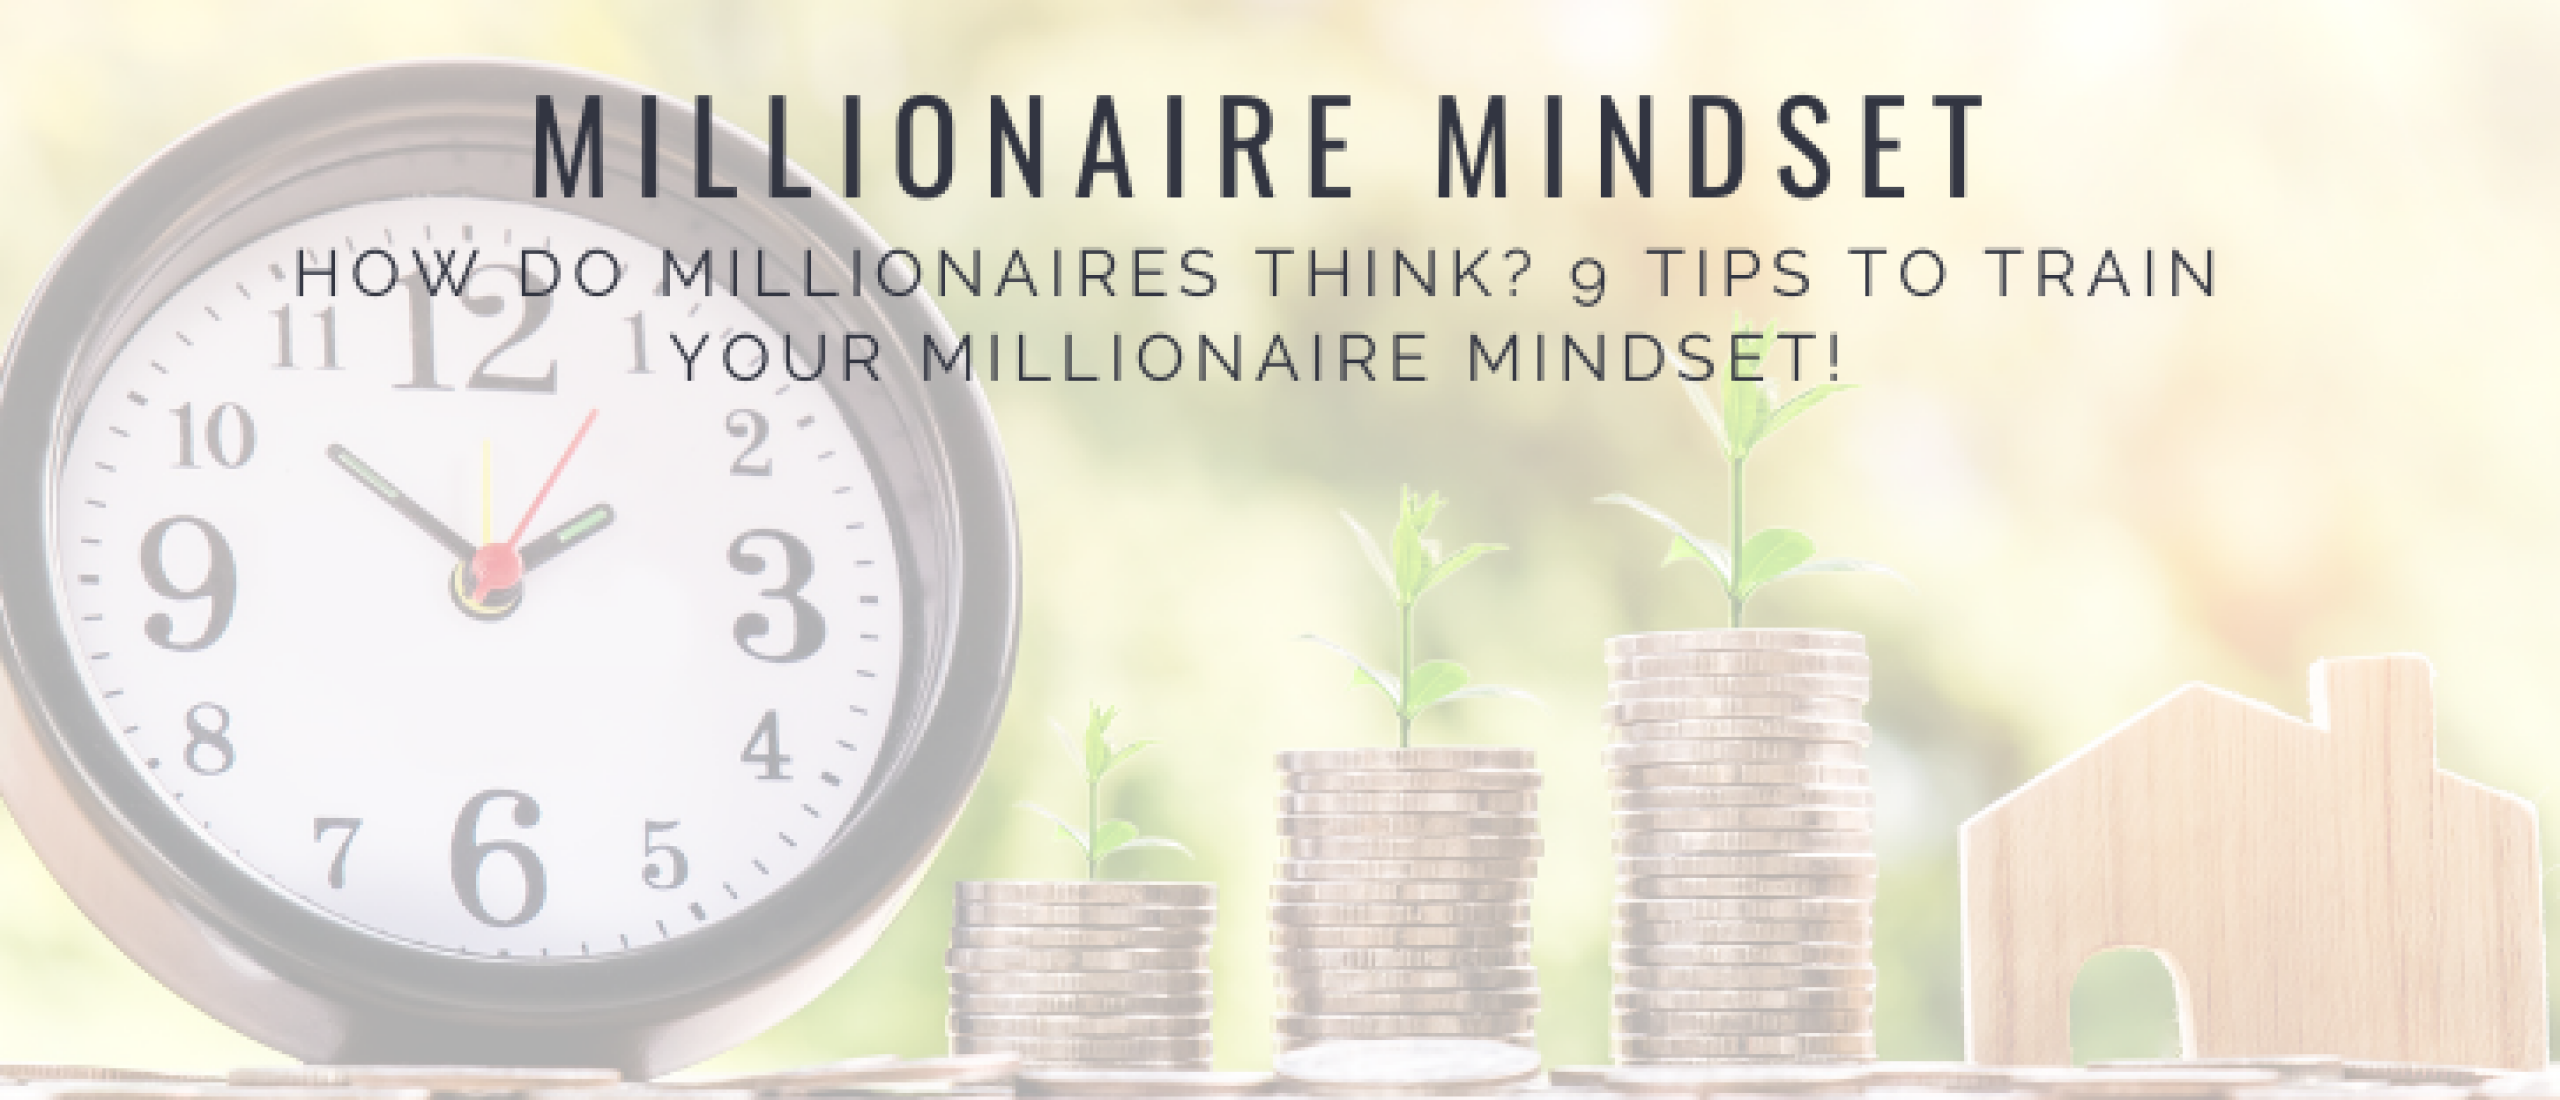 How to Train Your Millionaire Mindset: 9 Tips